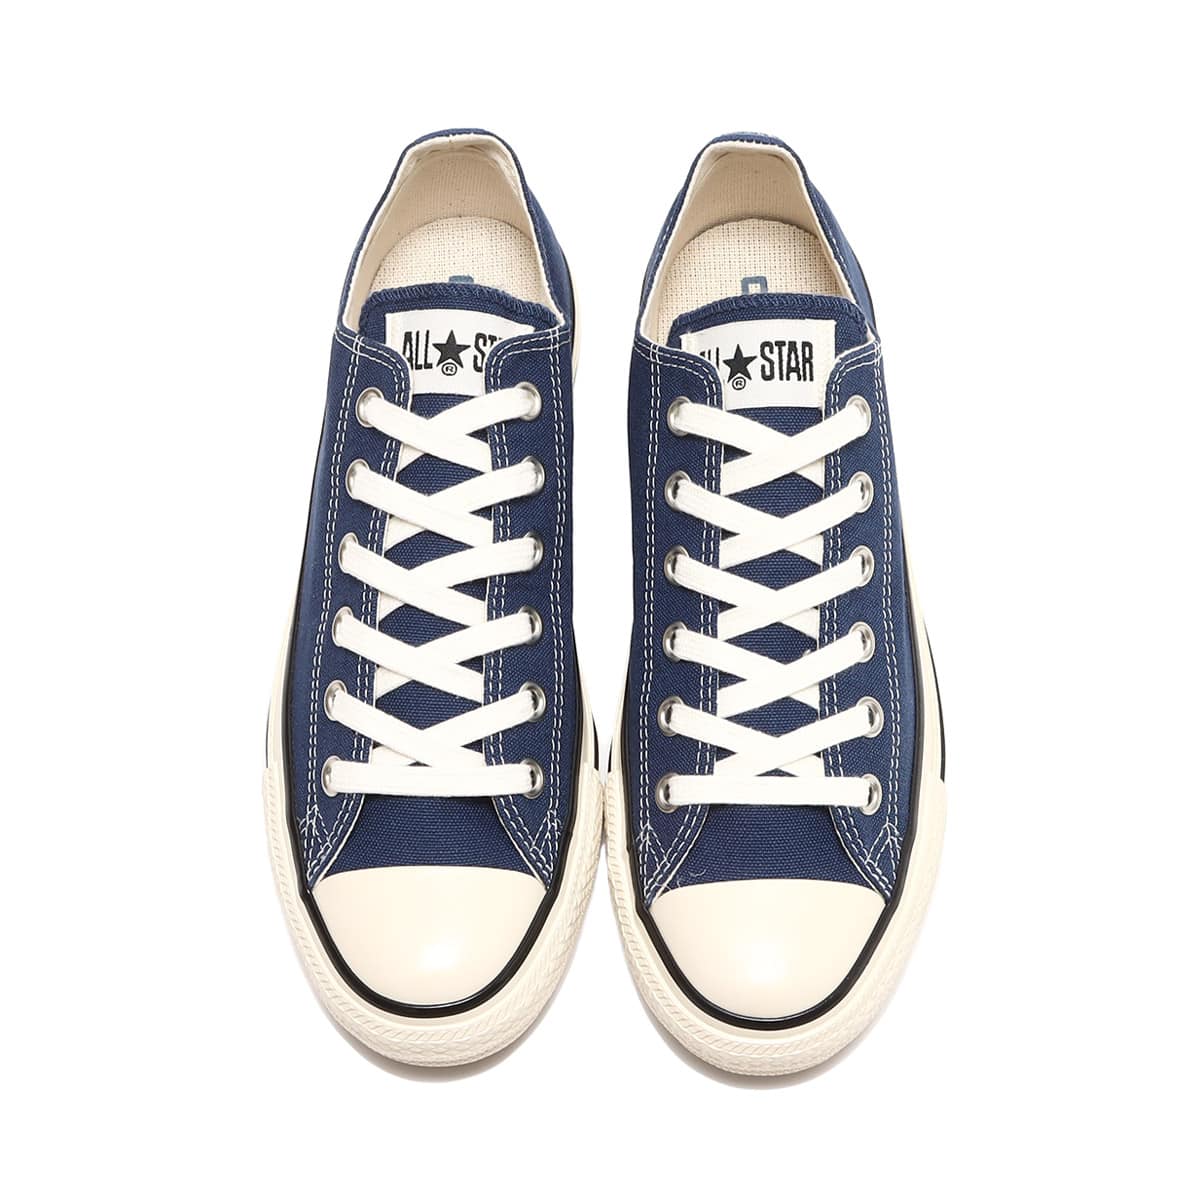 CONVERSE ALL STAR US COLORS OX NAVY 22FW-I